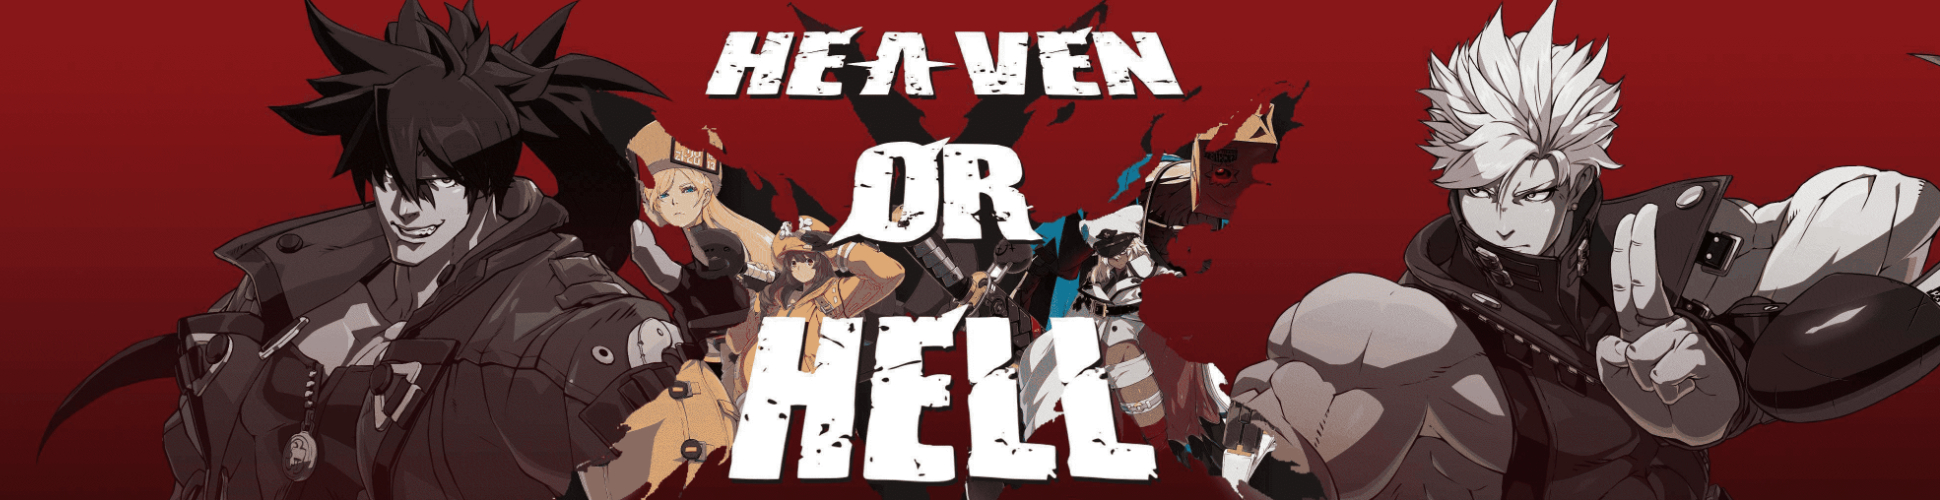 Heaven or Hell #51